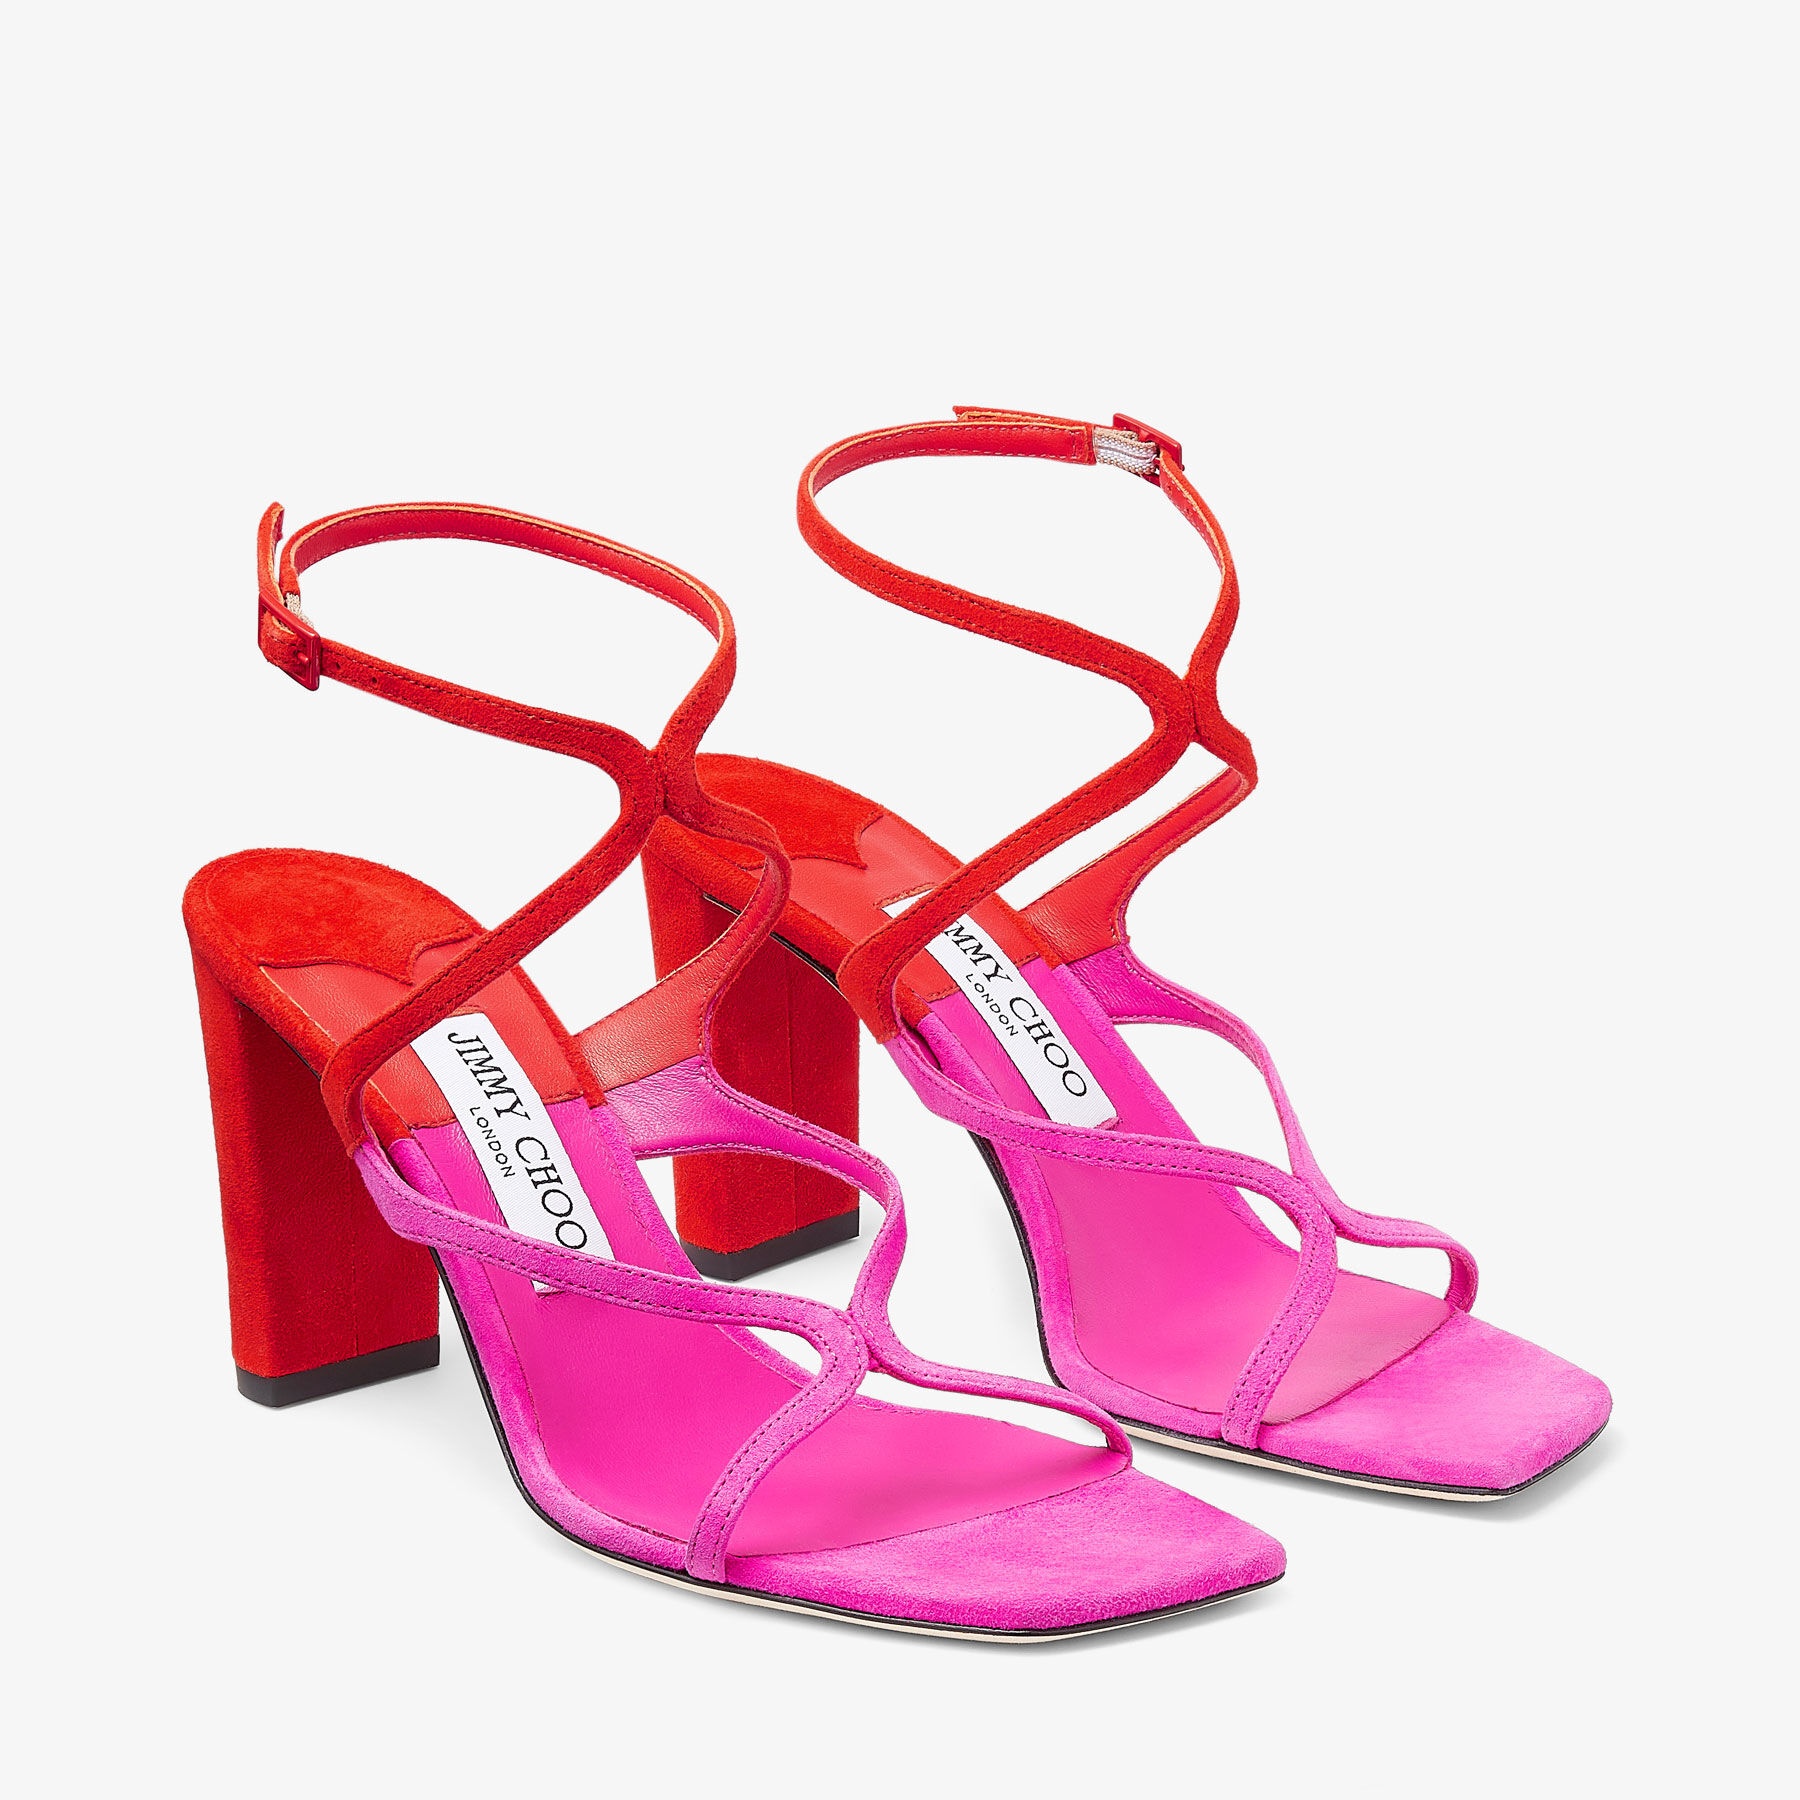 Azie 85
Fuchsia and Paprika Patchwork Suede Sandals - 2